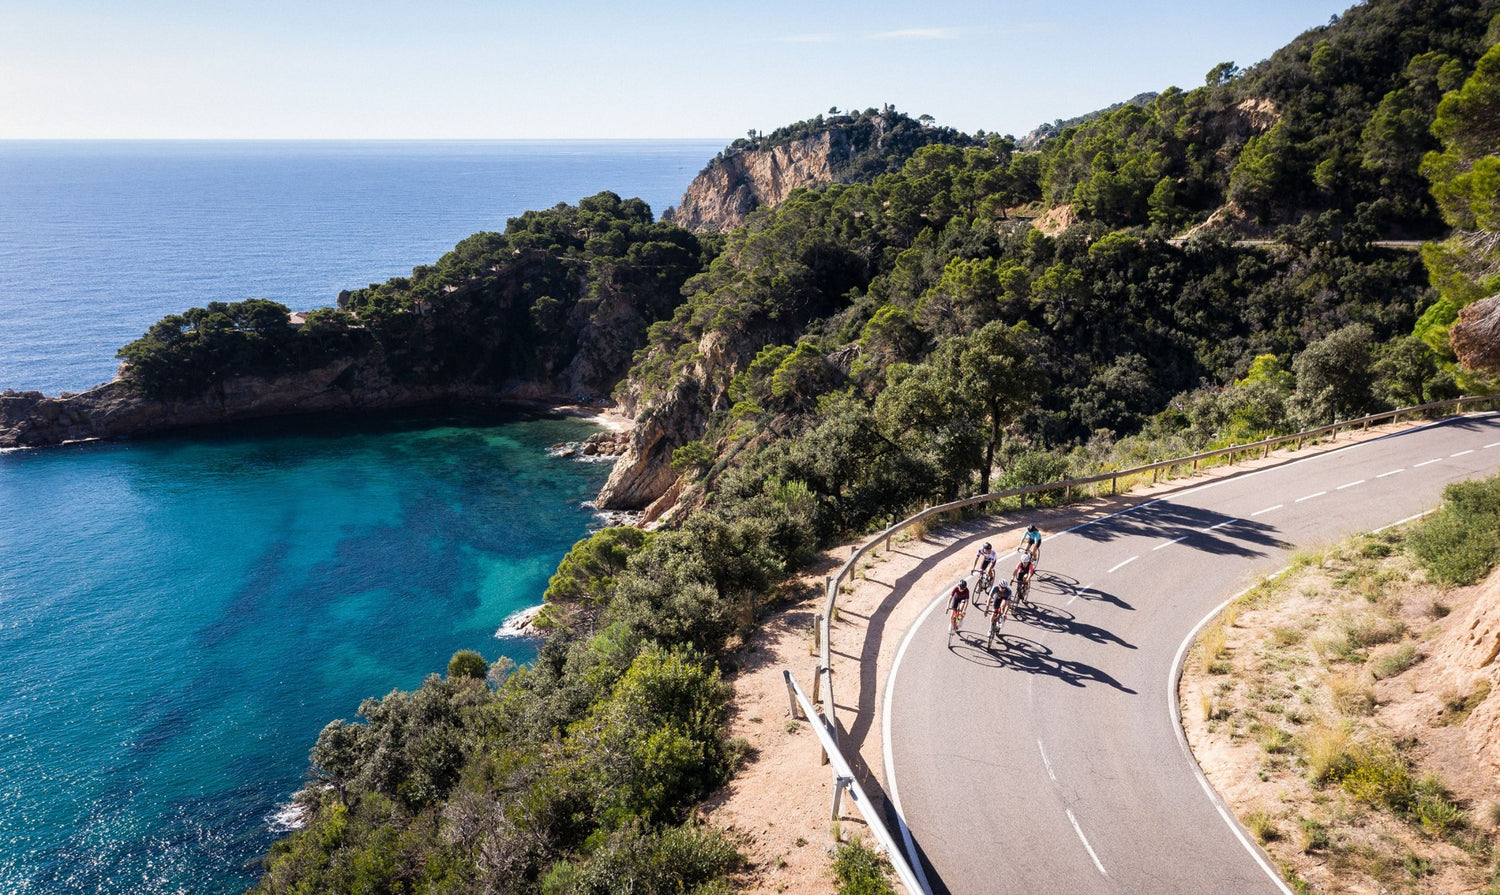 Enjoy the beauty of road cycling in Girona Spain.